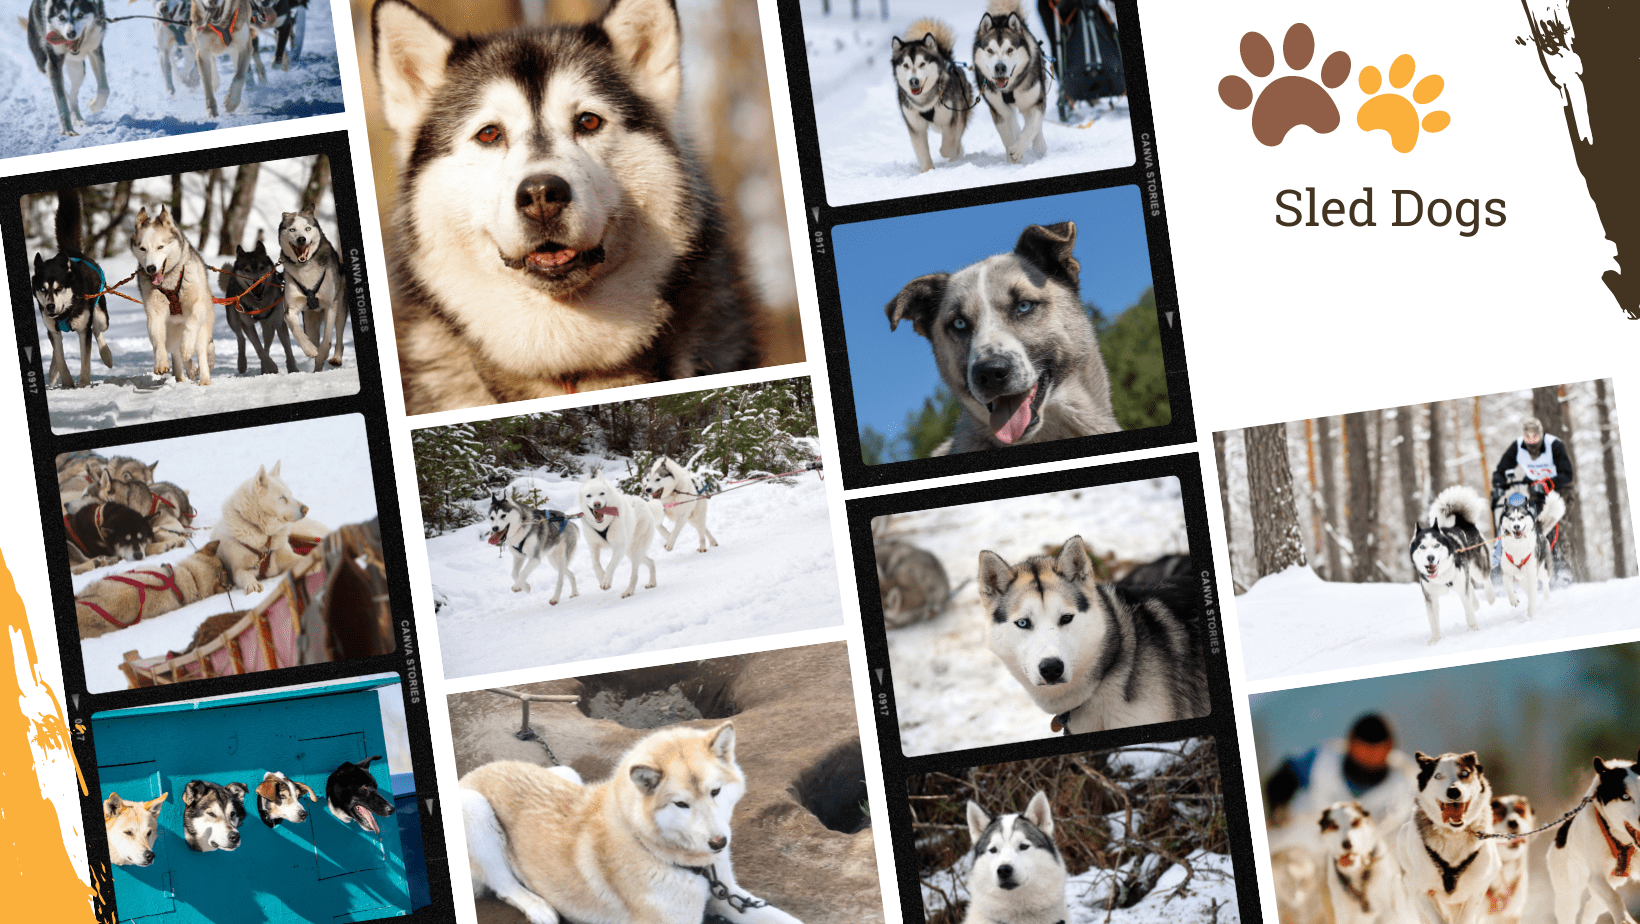 Dog Breed Archive Sled Dogs Dog Breeds